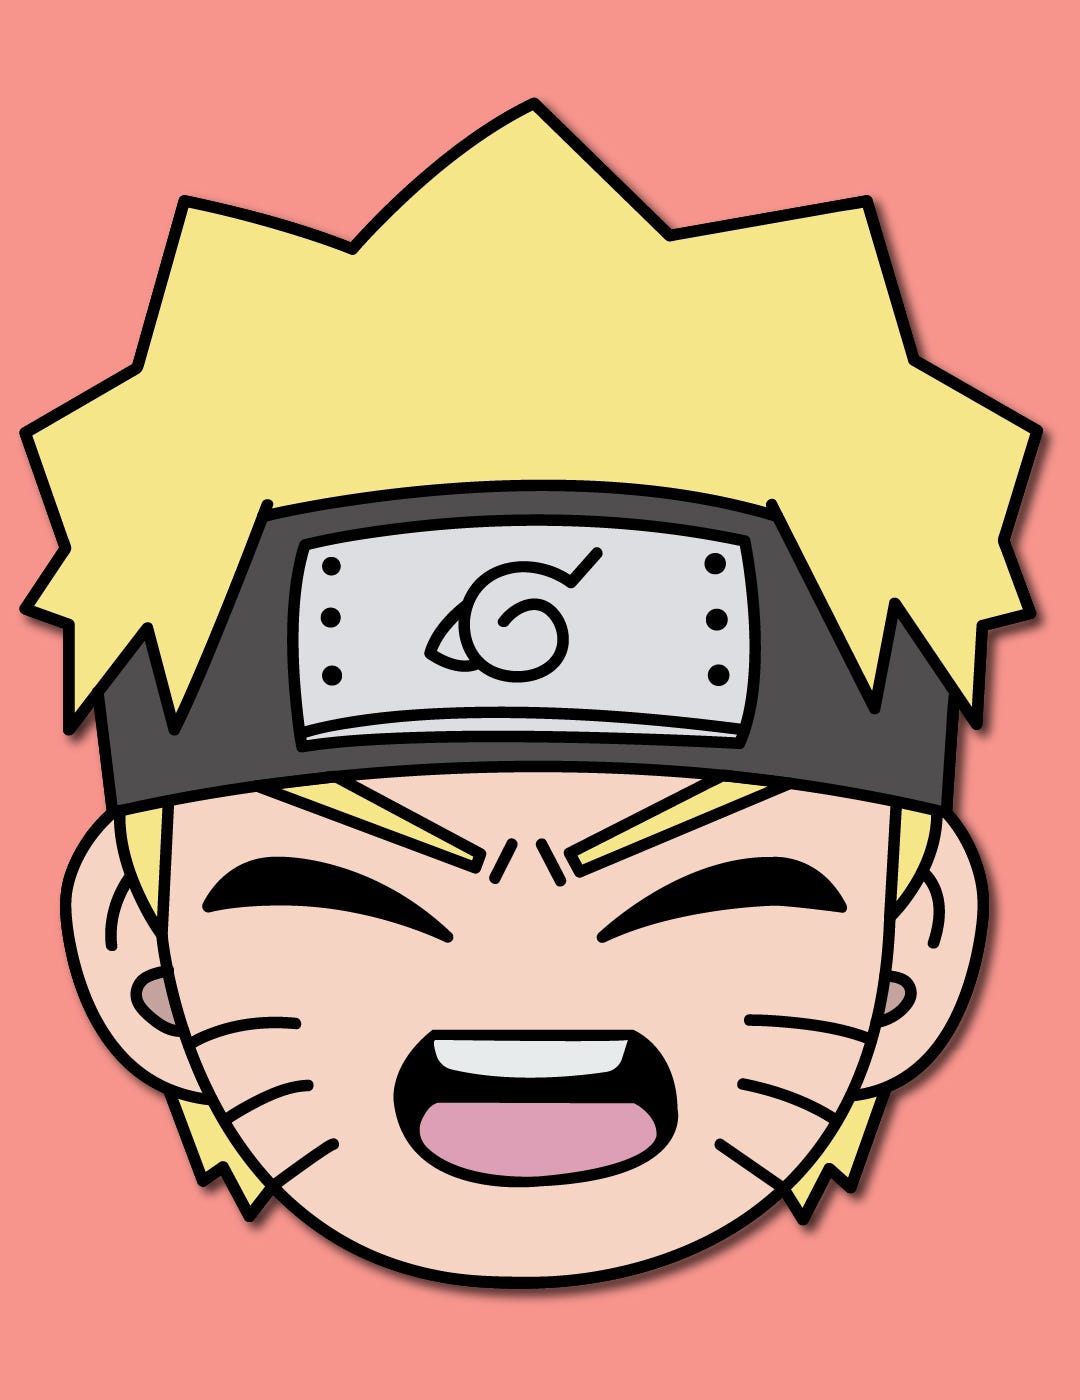 How To Draw Naruto Character  Step By Step - Storiespub - Medium